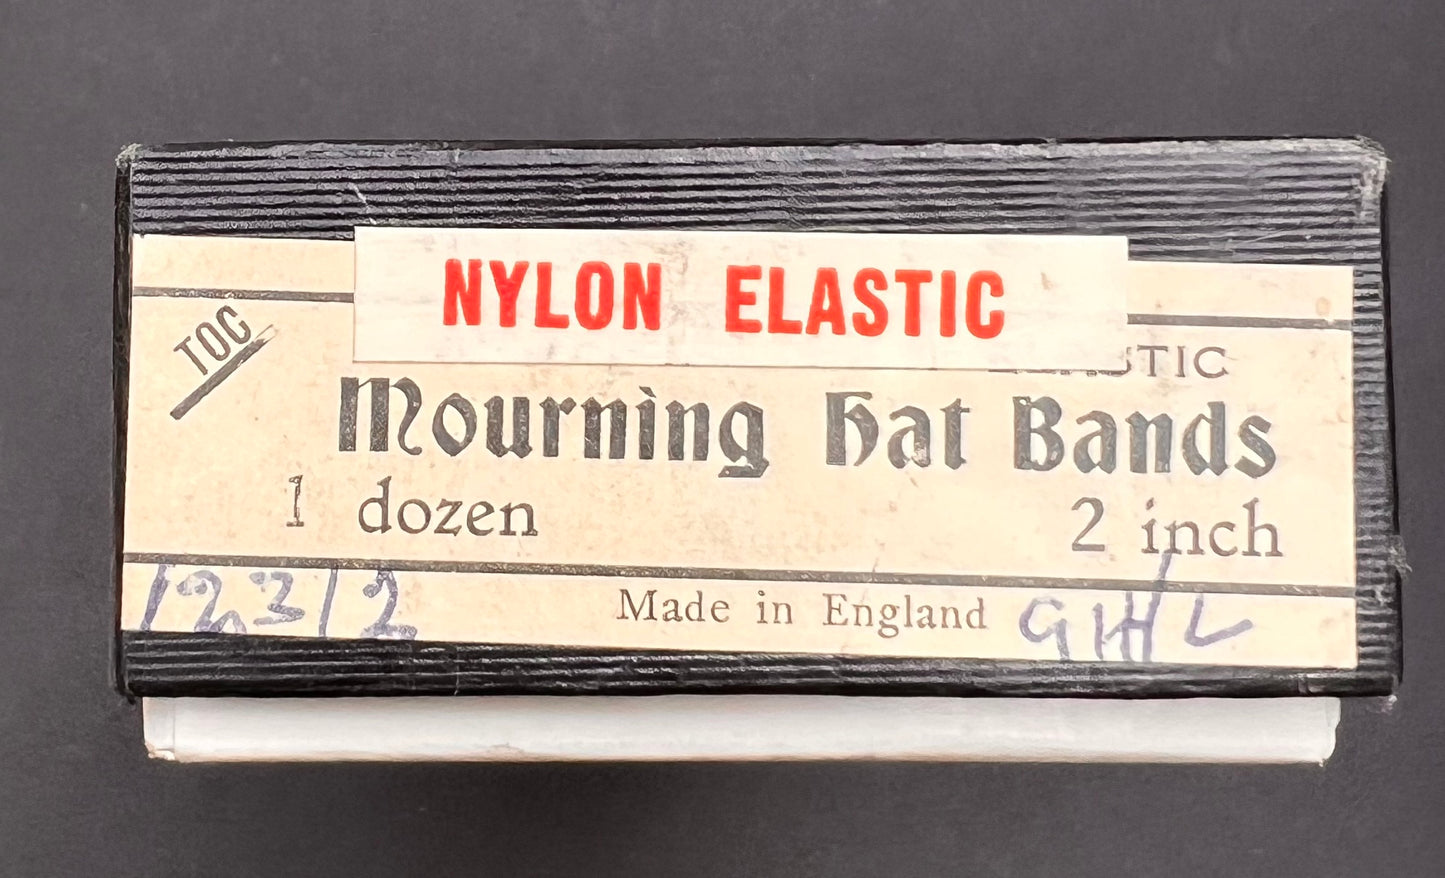 Box of a Dozen 1940s Black Mourning Hat Bands